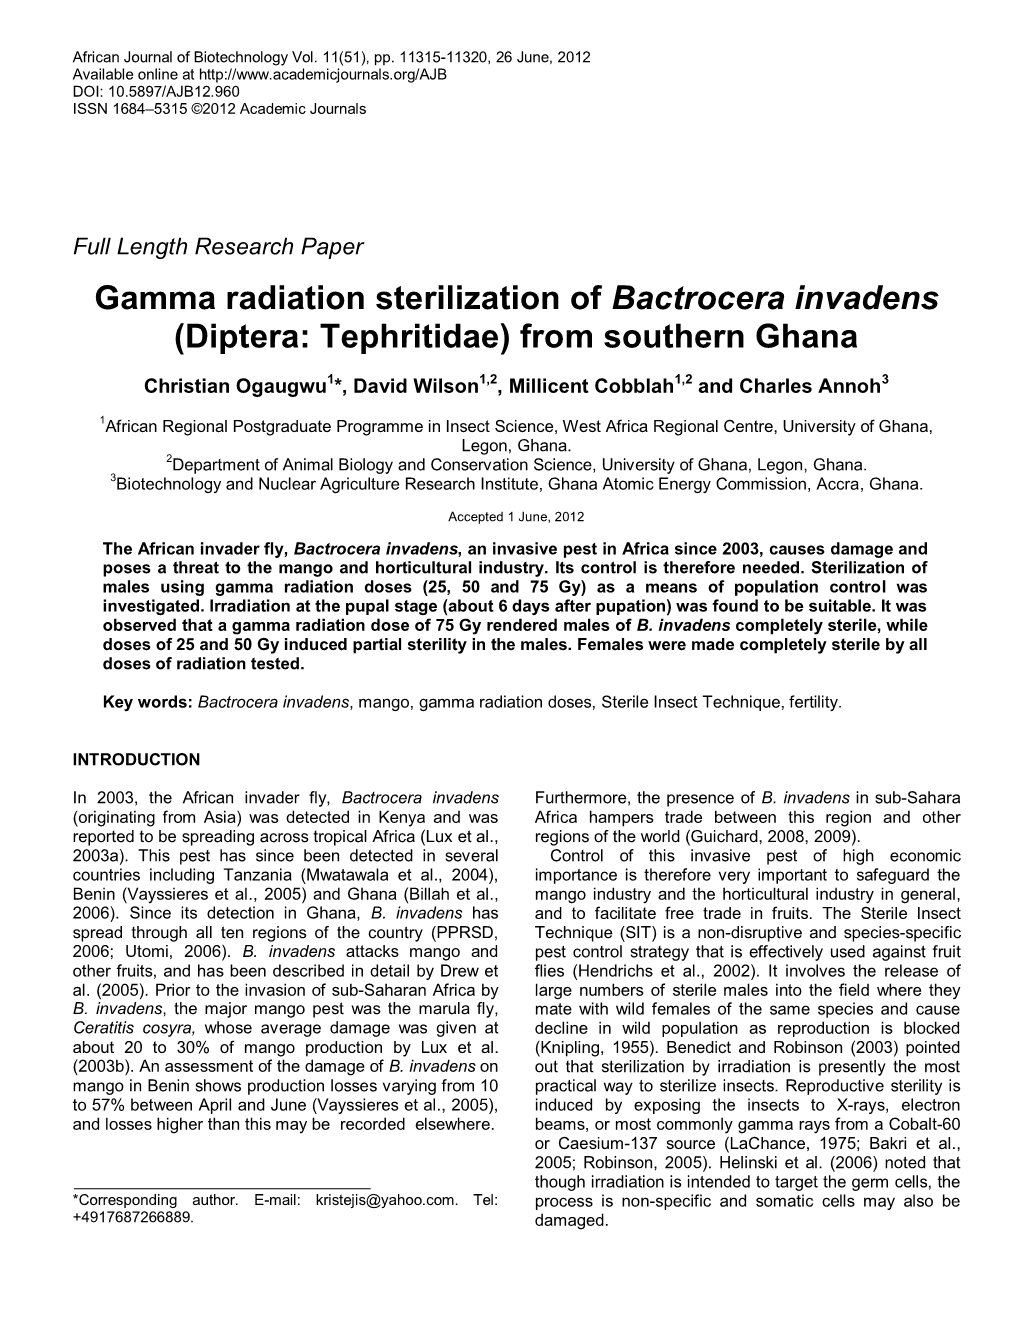 Gamma Radiation Sterilization of Bactrocera Invadens (Diptera: Tephritidae) from Southern Ghana